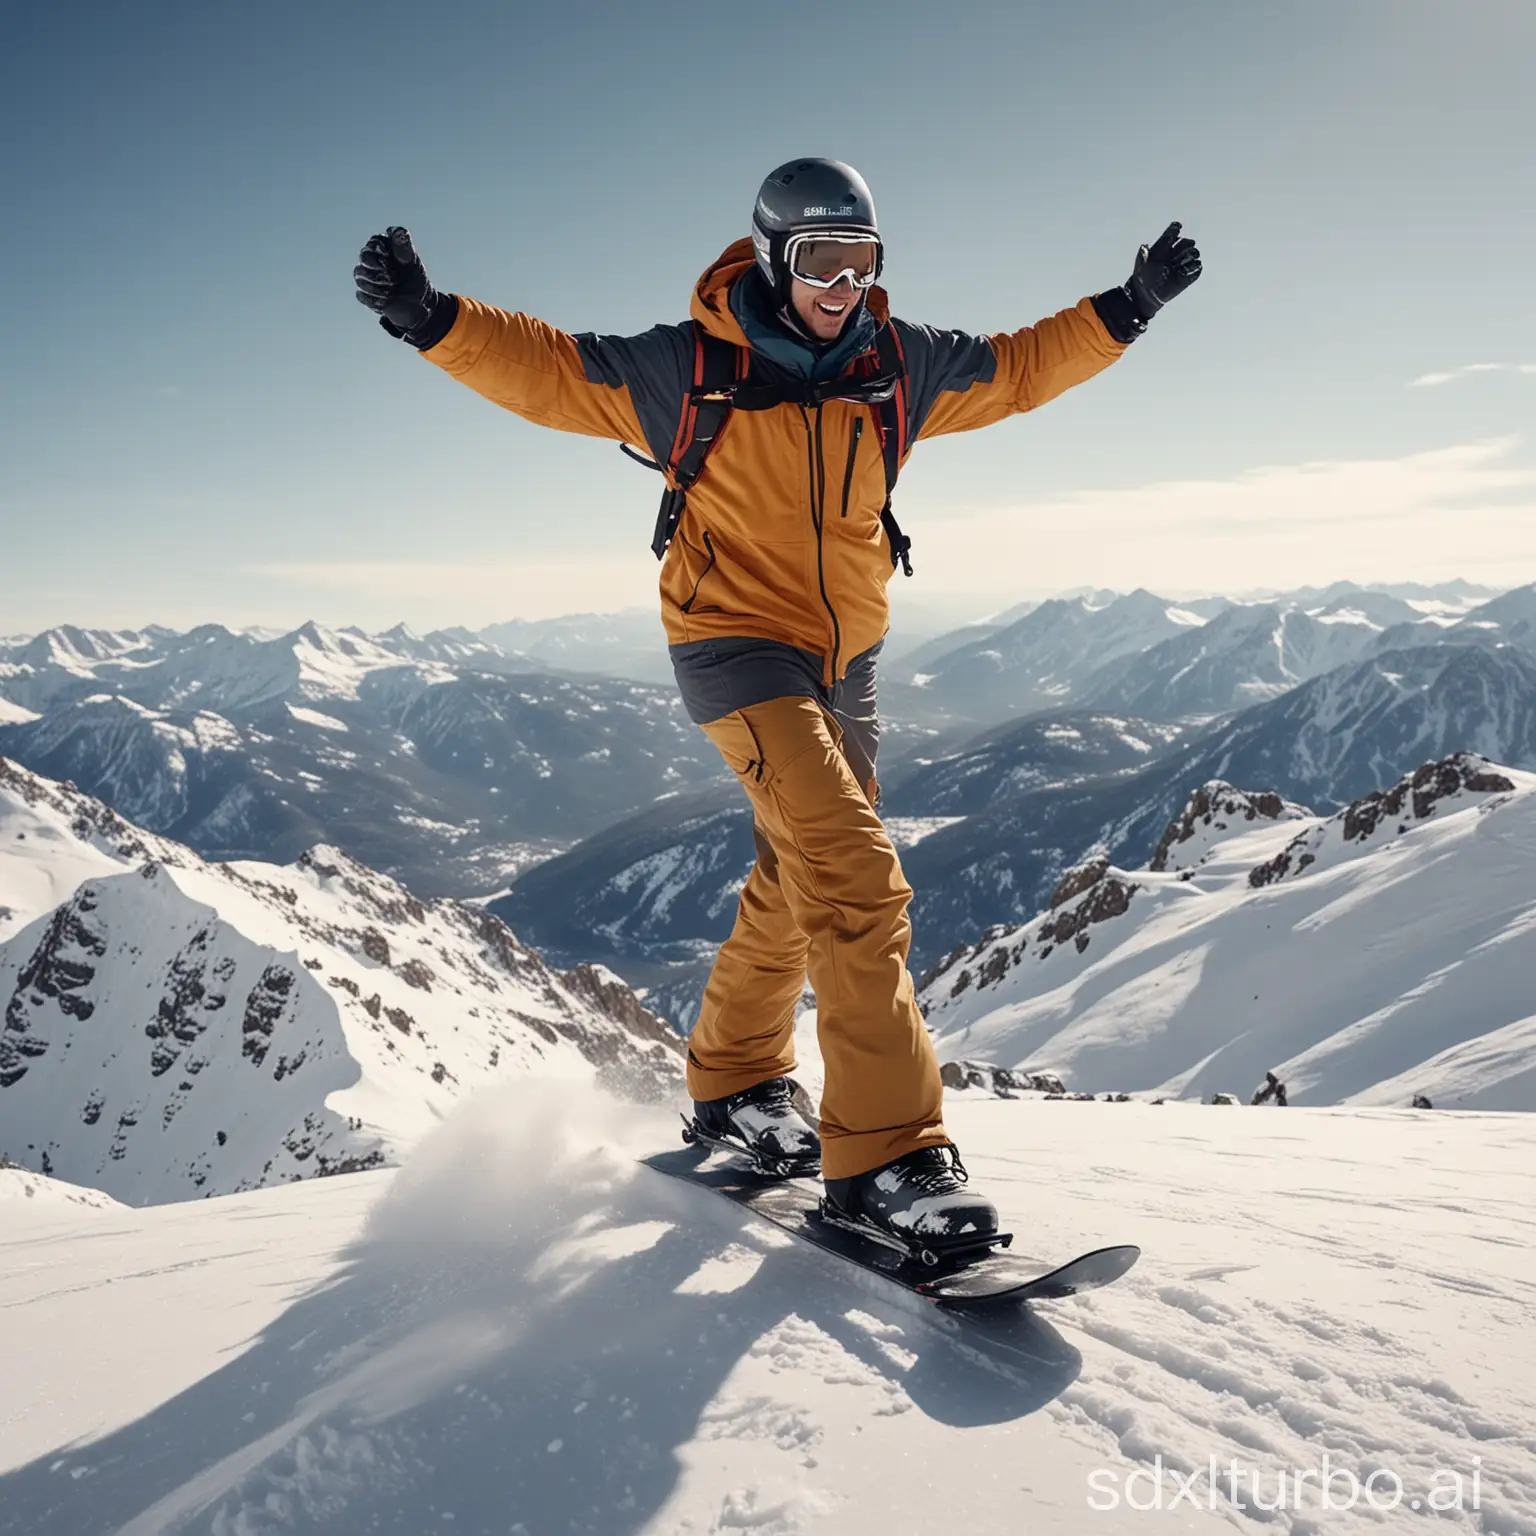 Confident-American-Man-Snowboarding-on-a-Snowy-Mountain